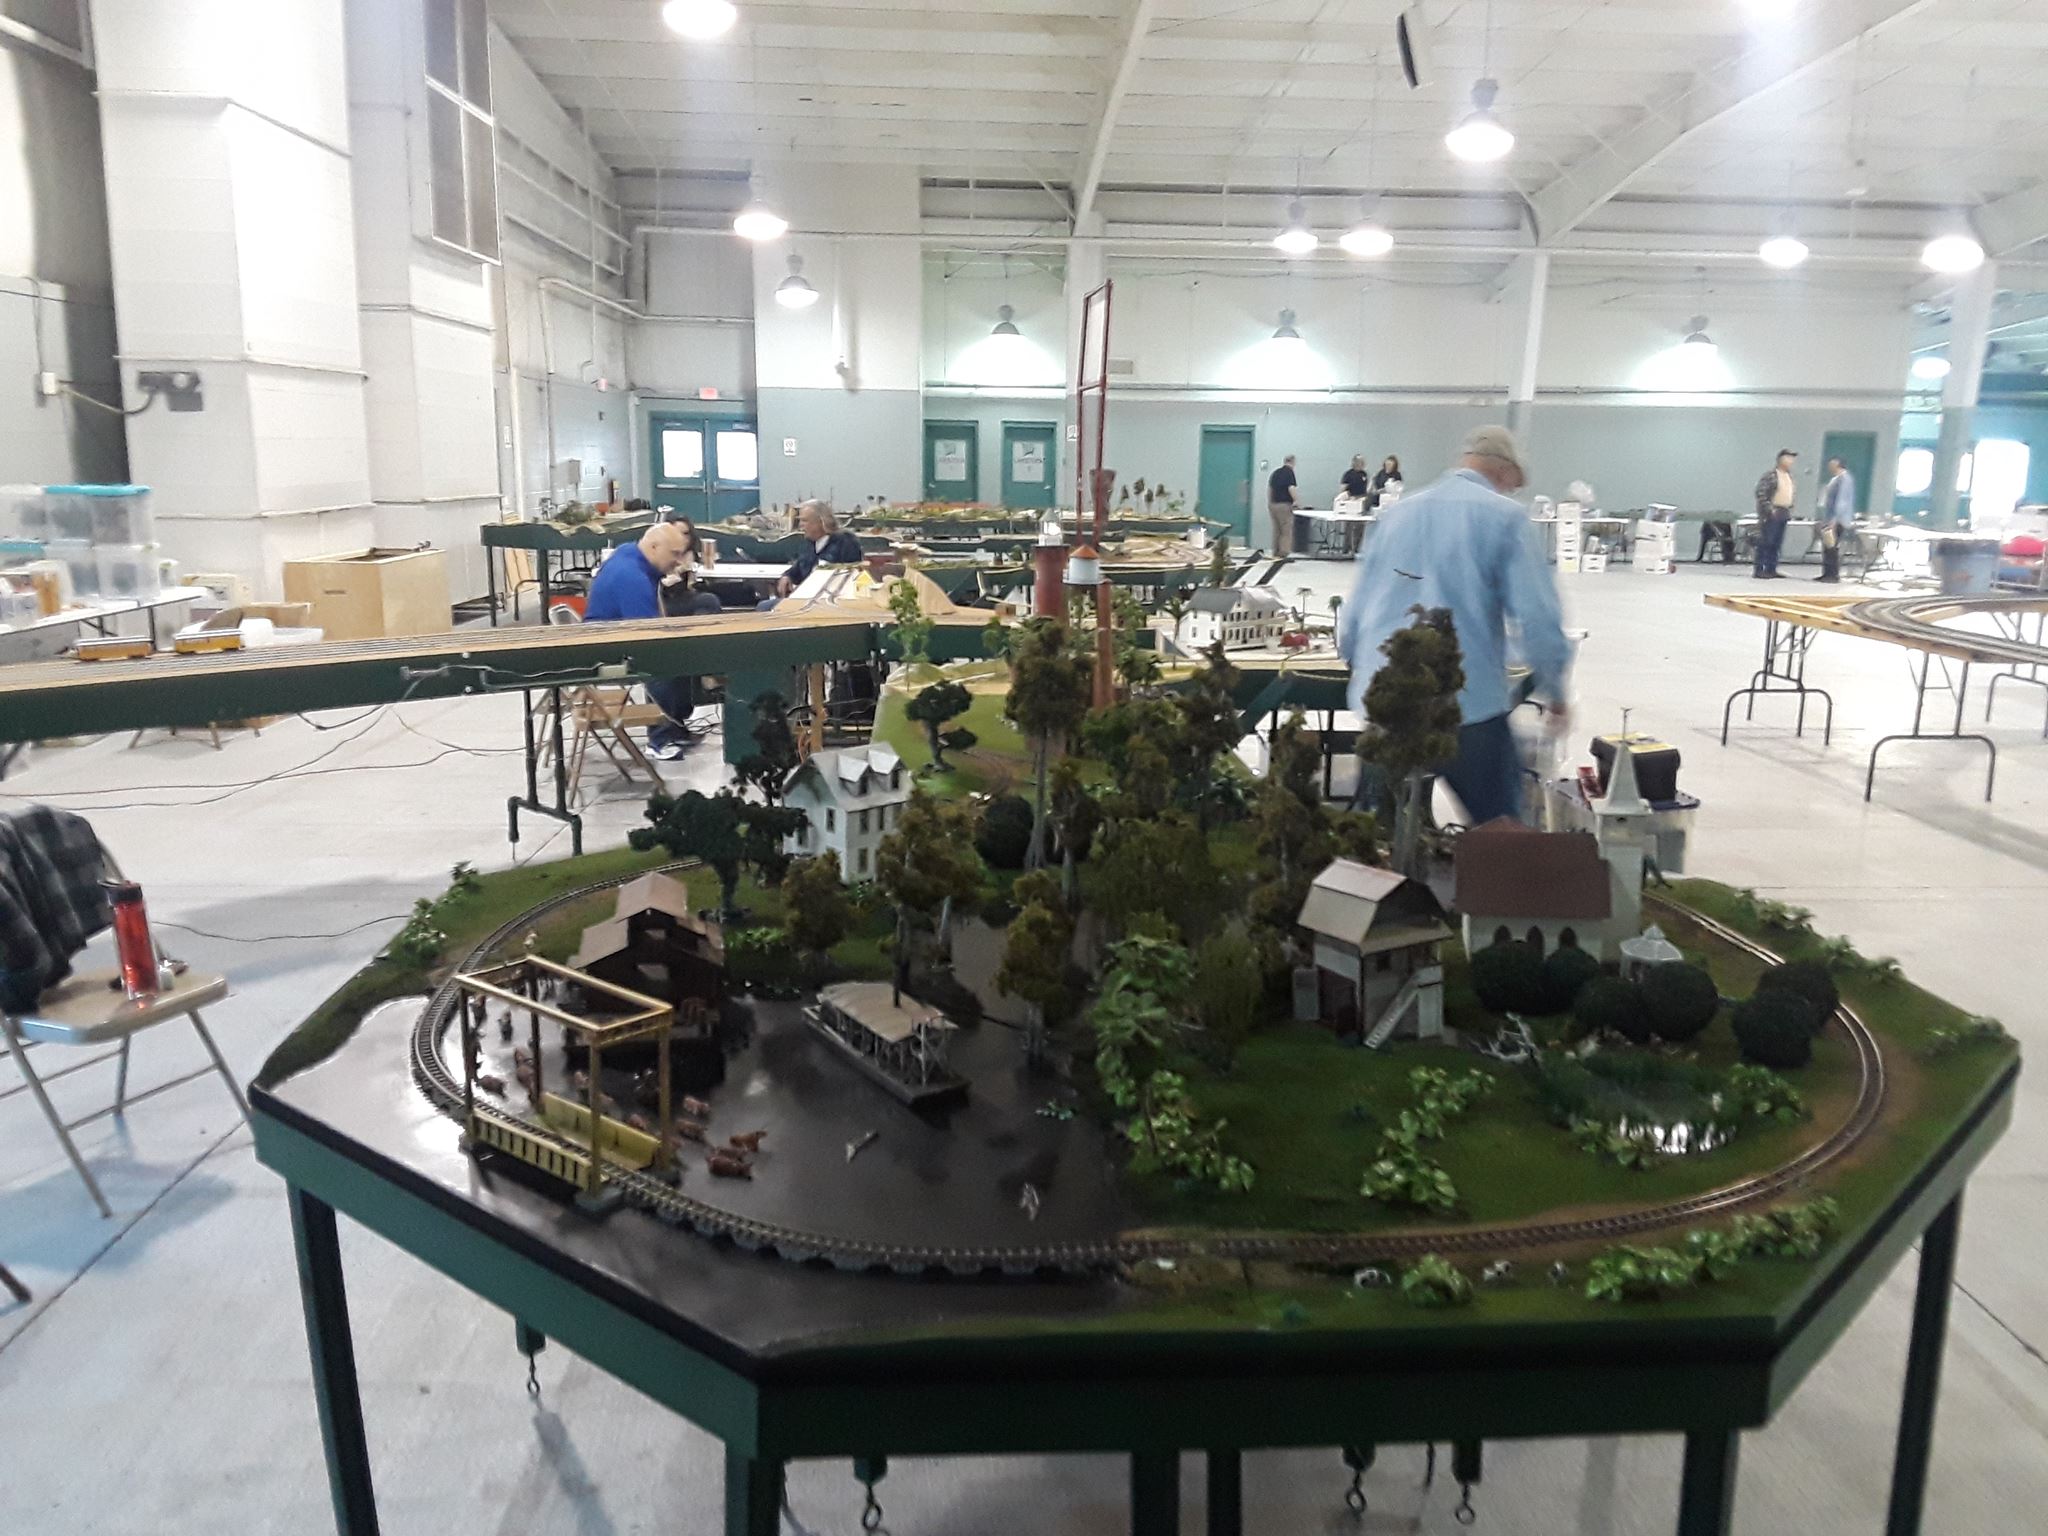 Same layout from the other end.